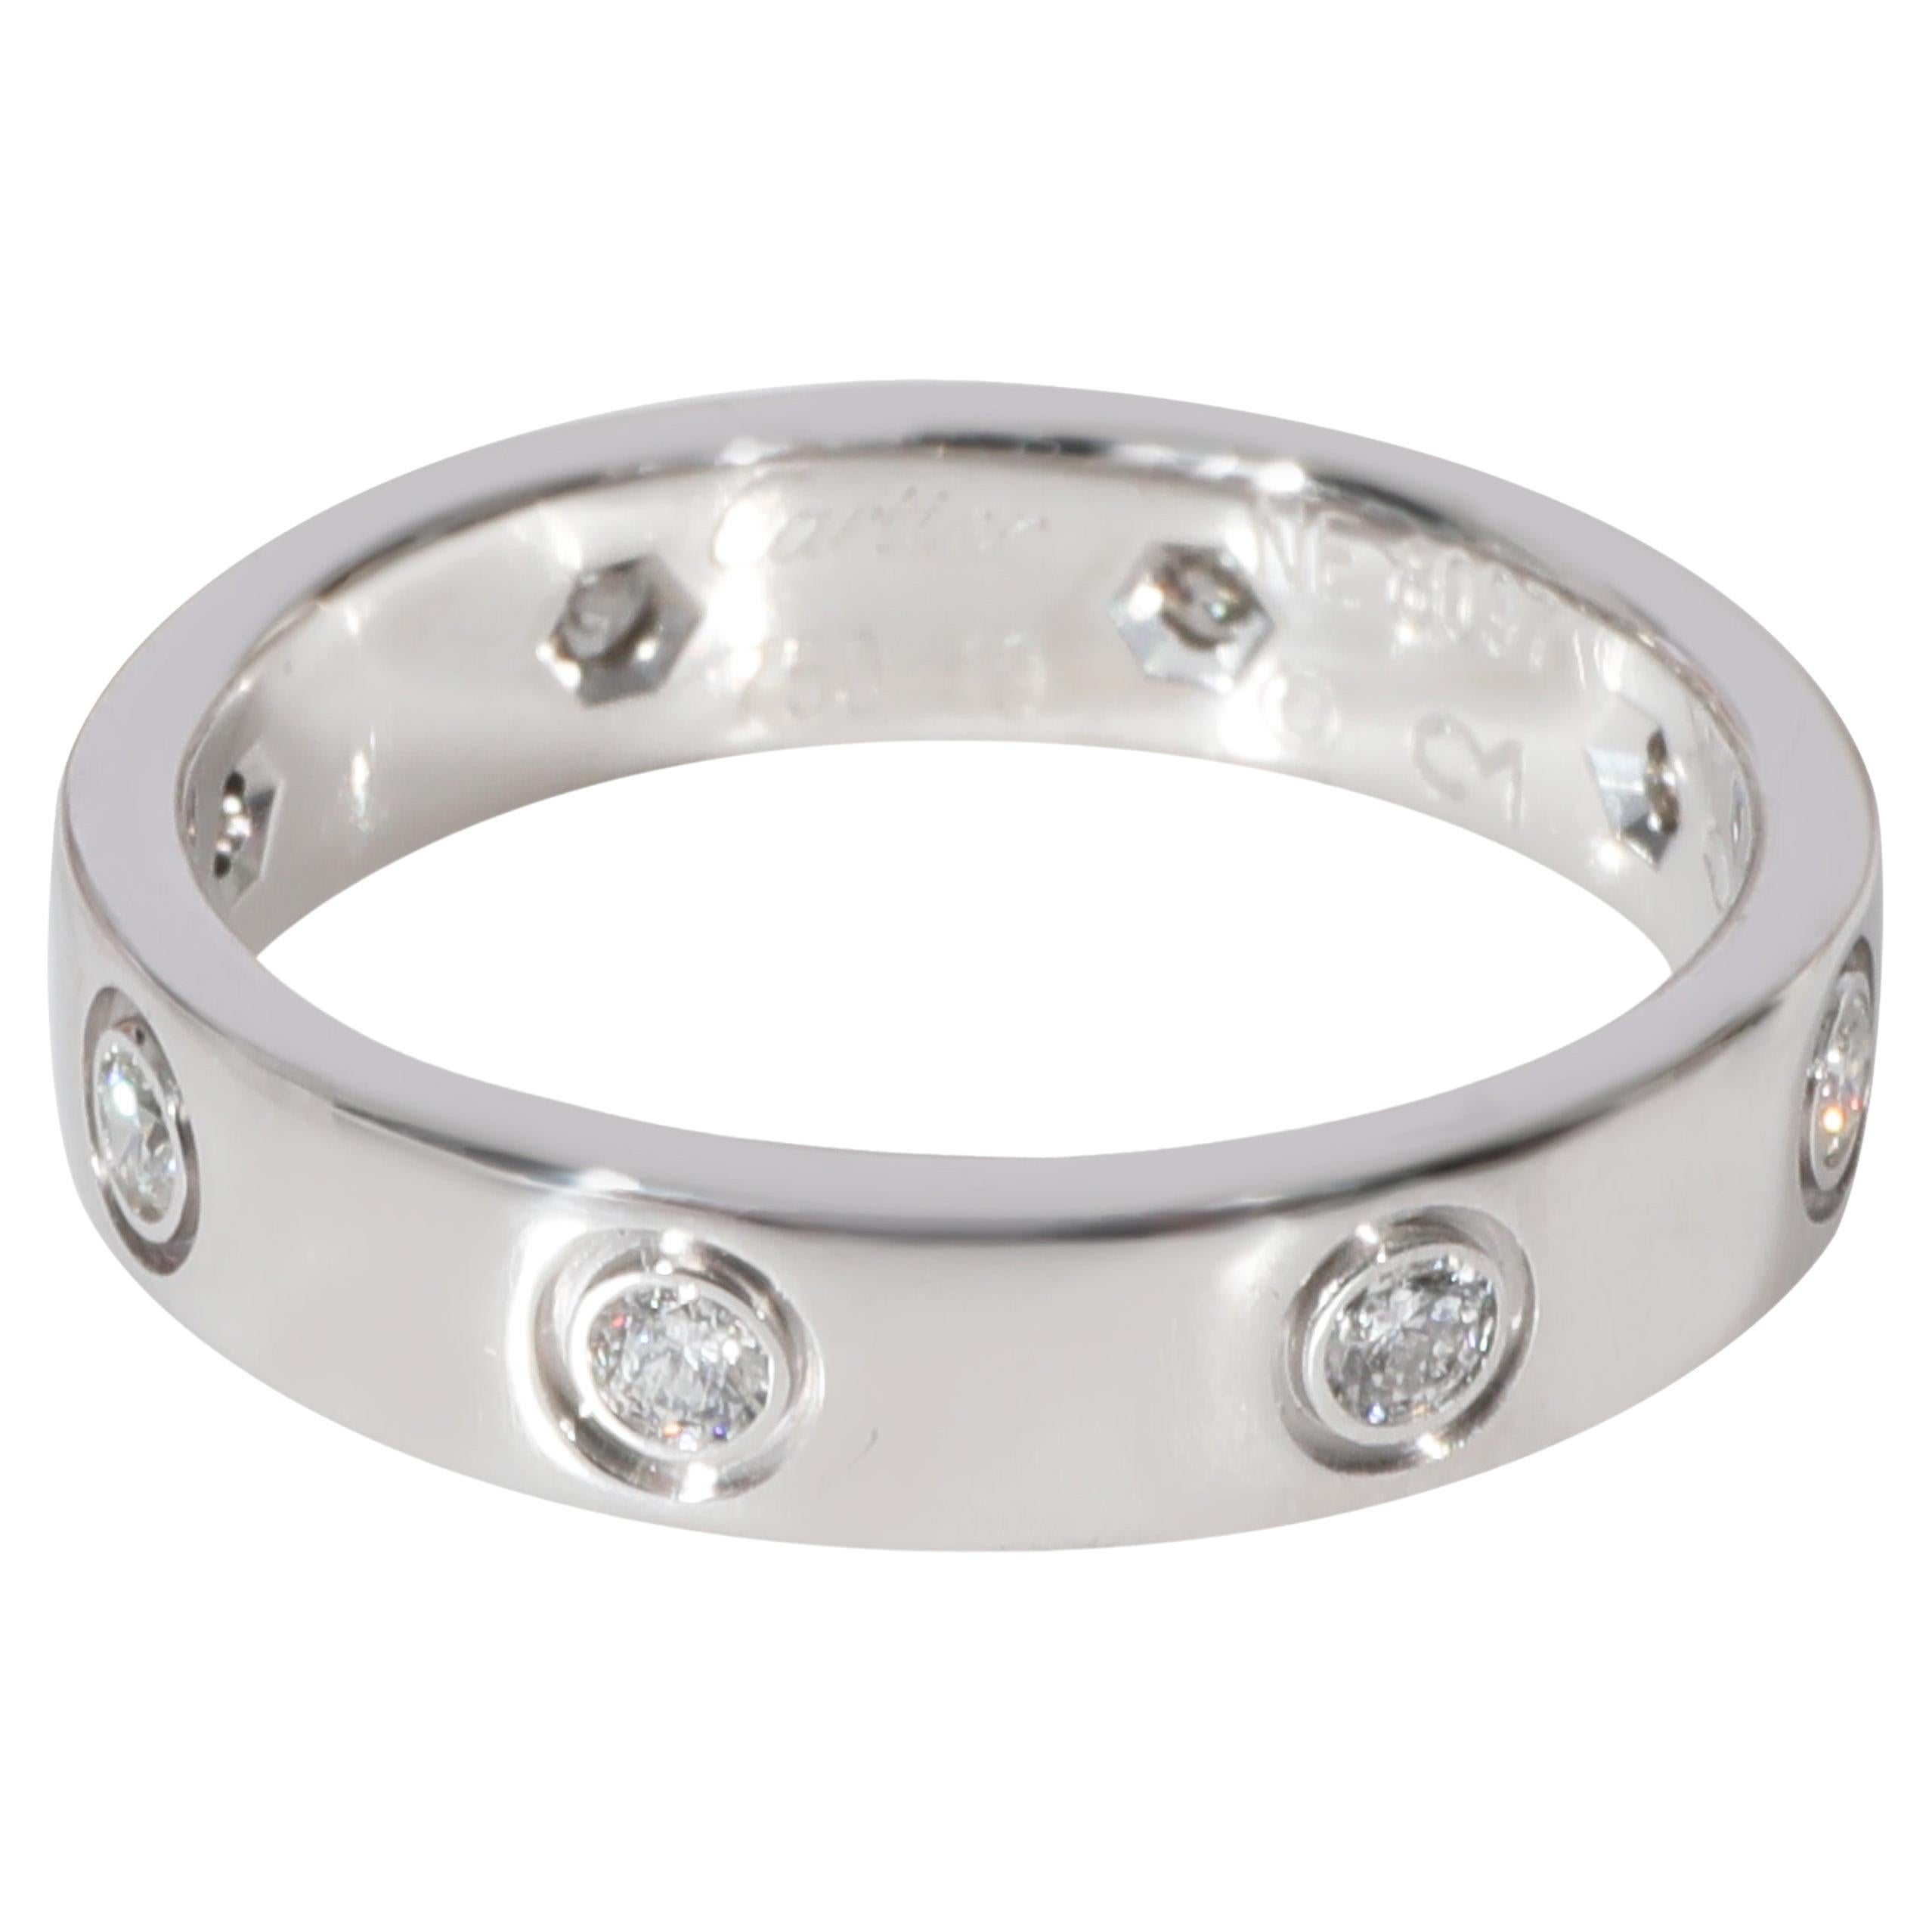 Cartier Love Diamond Wedding Band in 18k White Gold 0.19 CTW For Sale